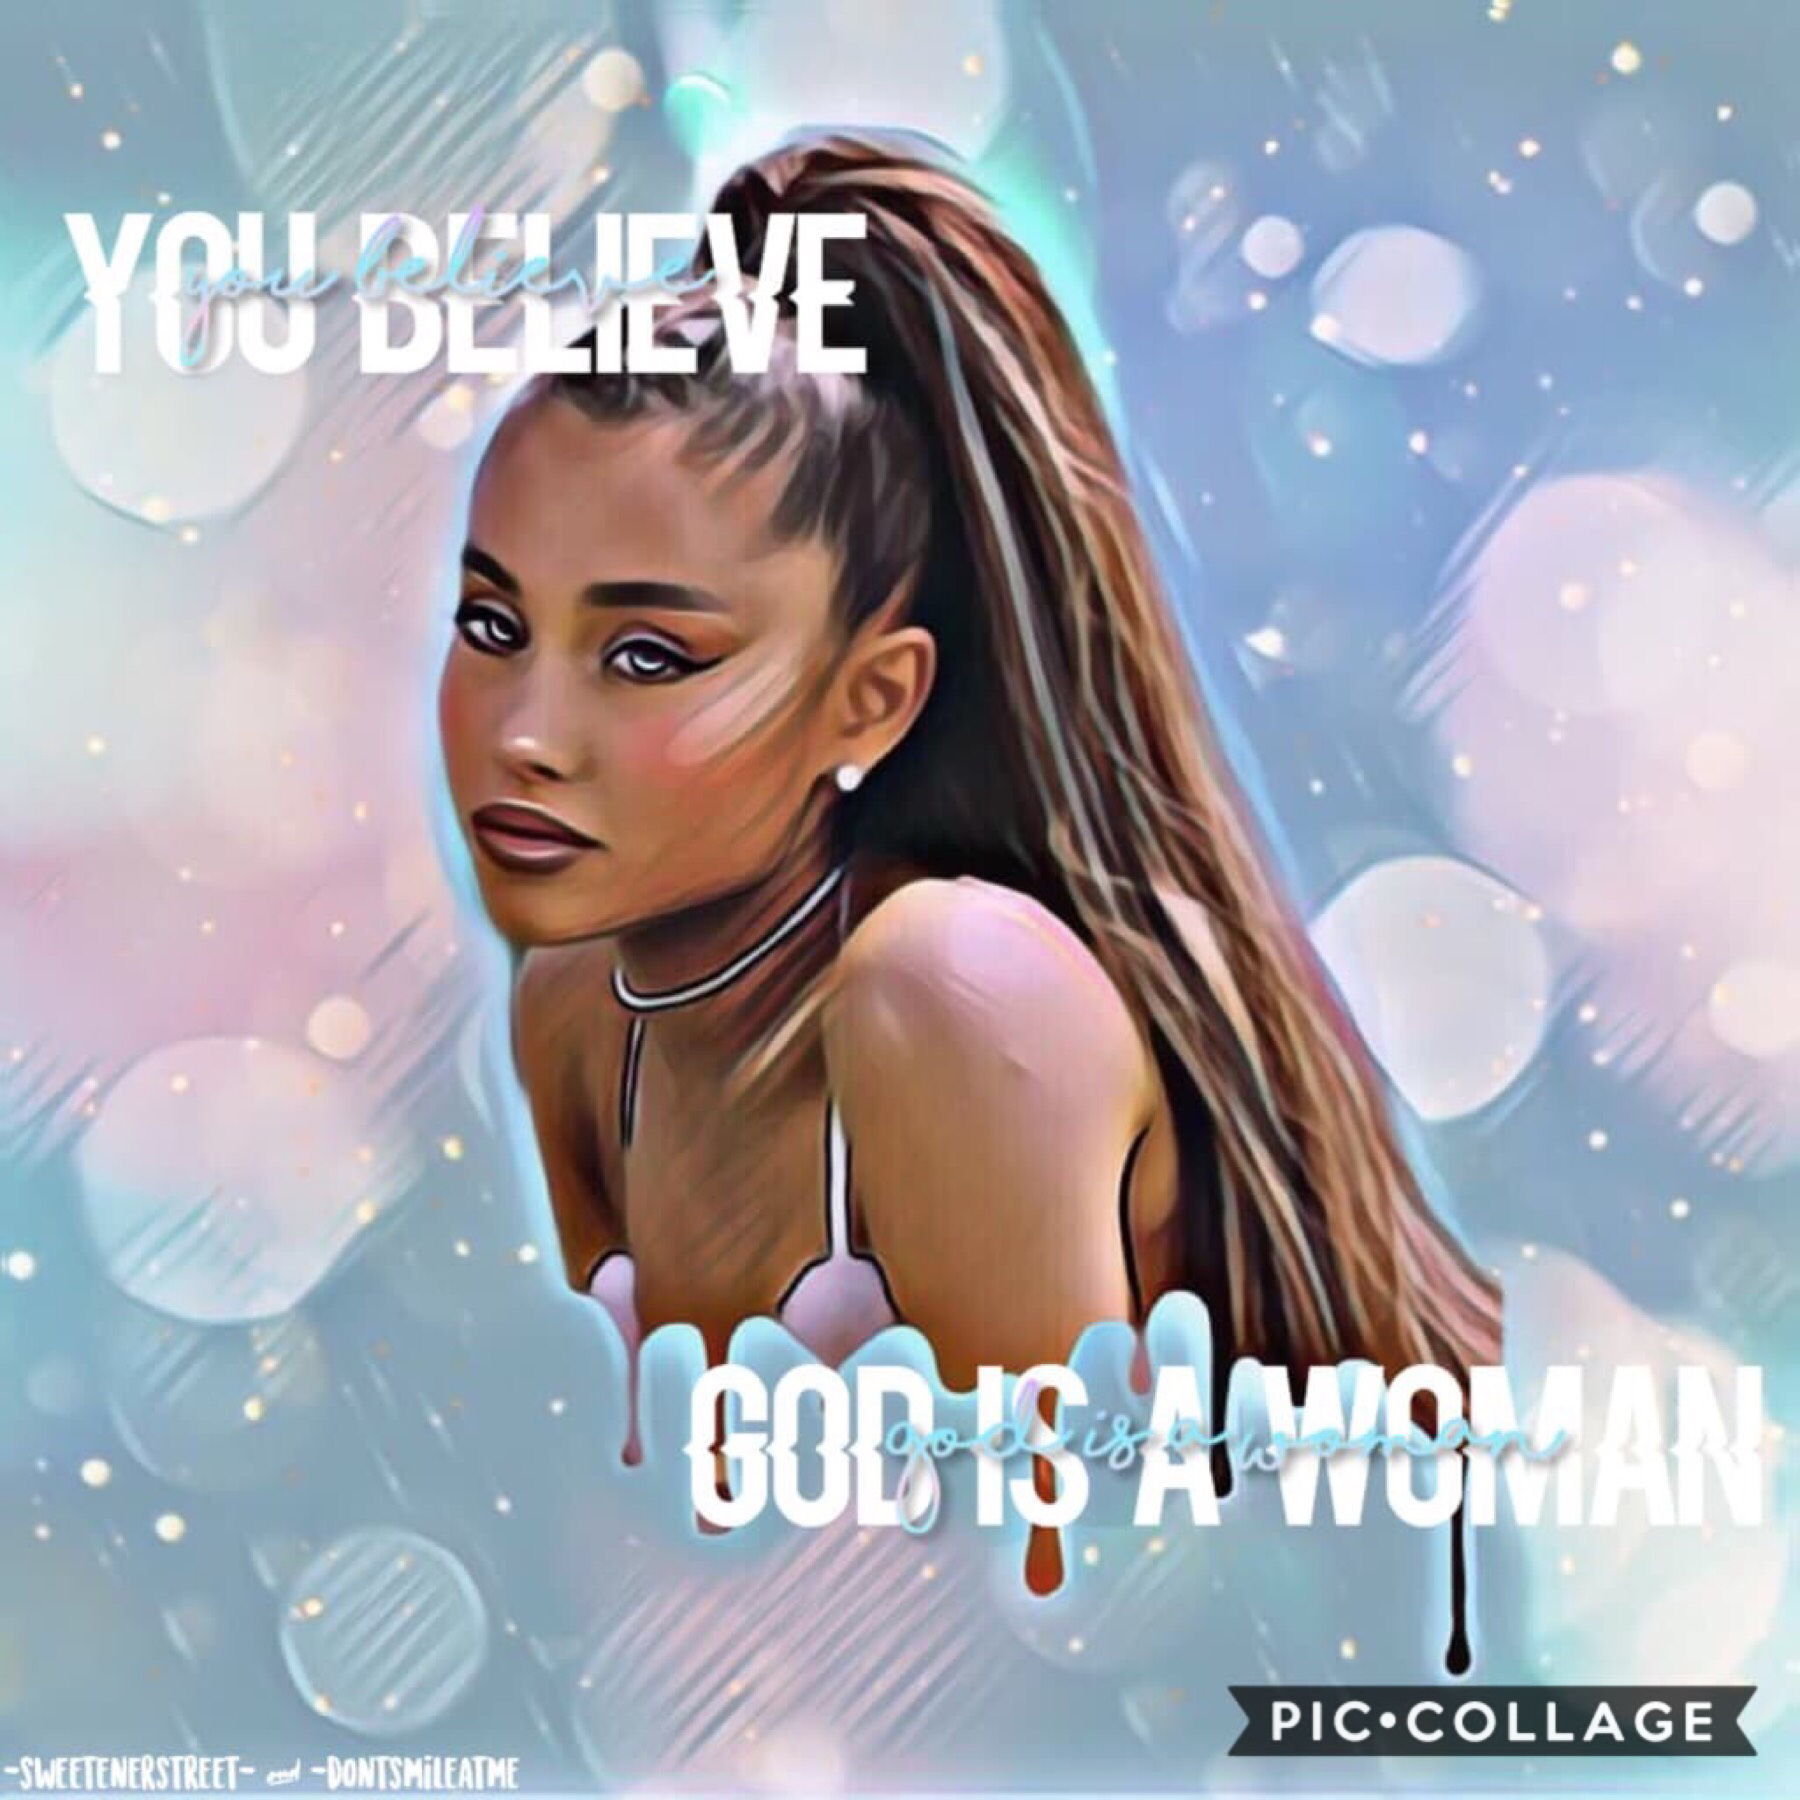 ❣️COLLAB❣️
With the super talented -sweetnerstreet- she’s so sweet and her edits are gorgeous so make sure to follow her💜